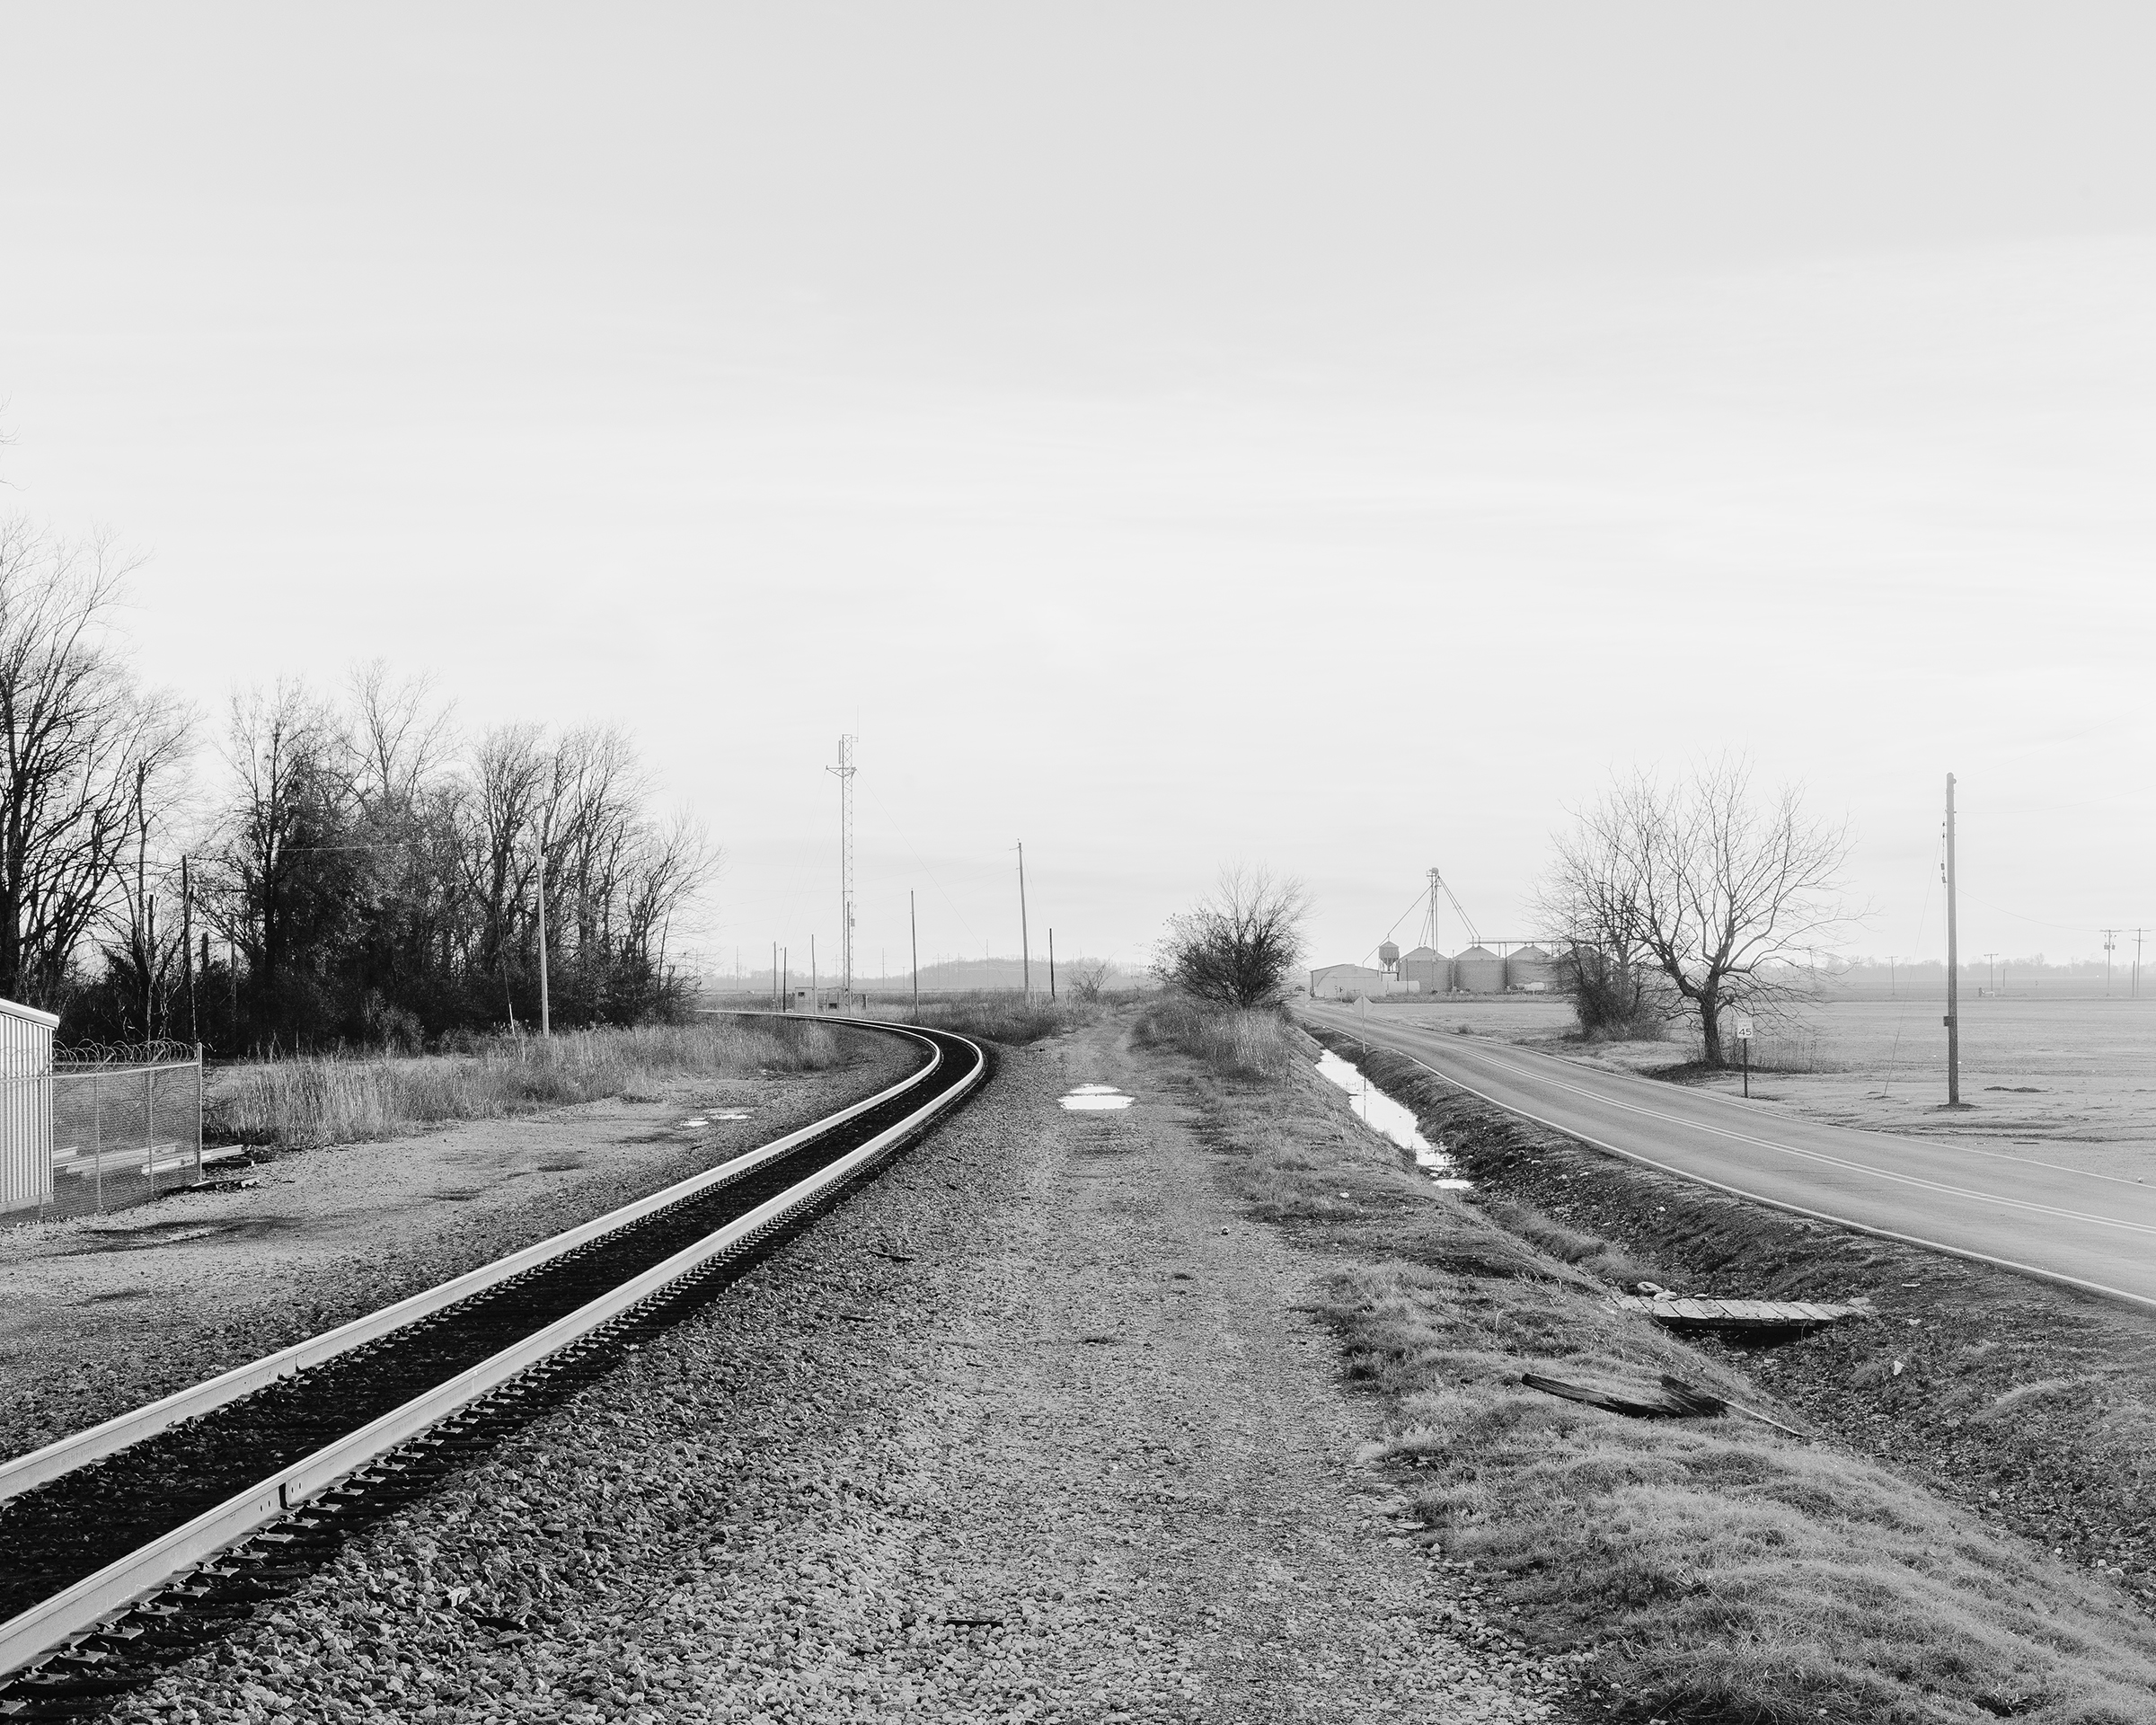 Black and white photograph of a landscape with a railroad track and a road.